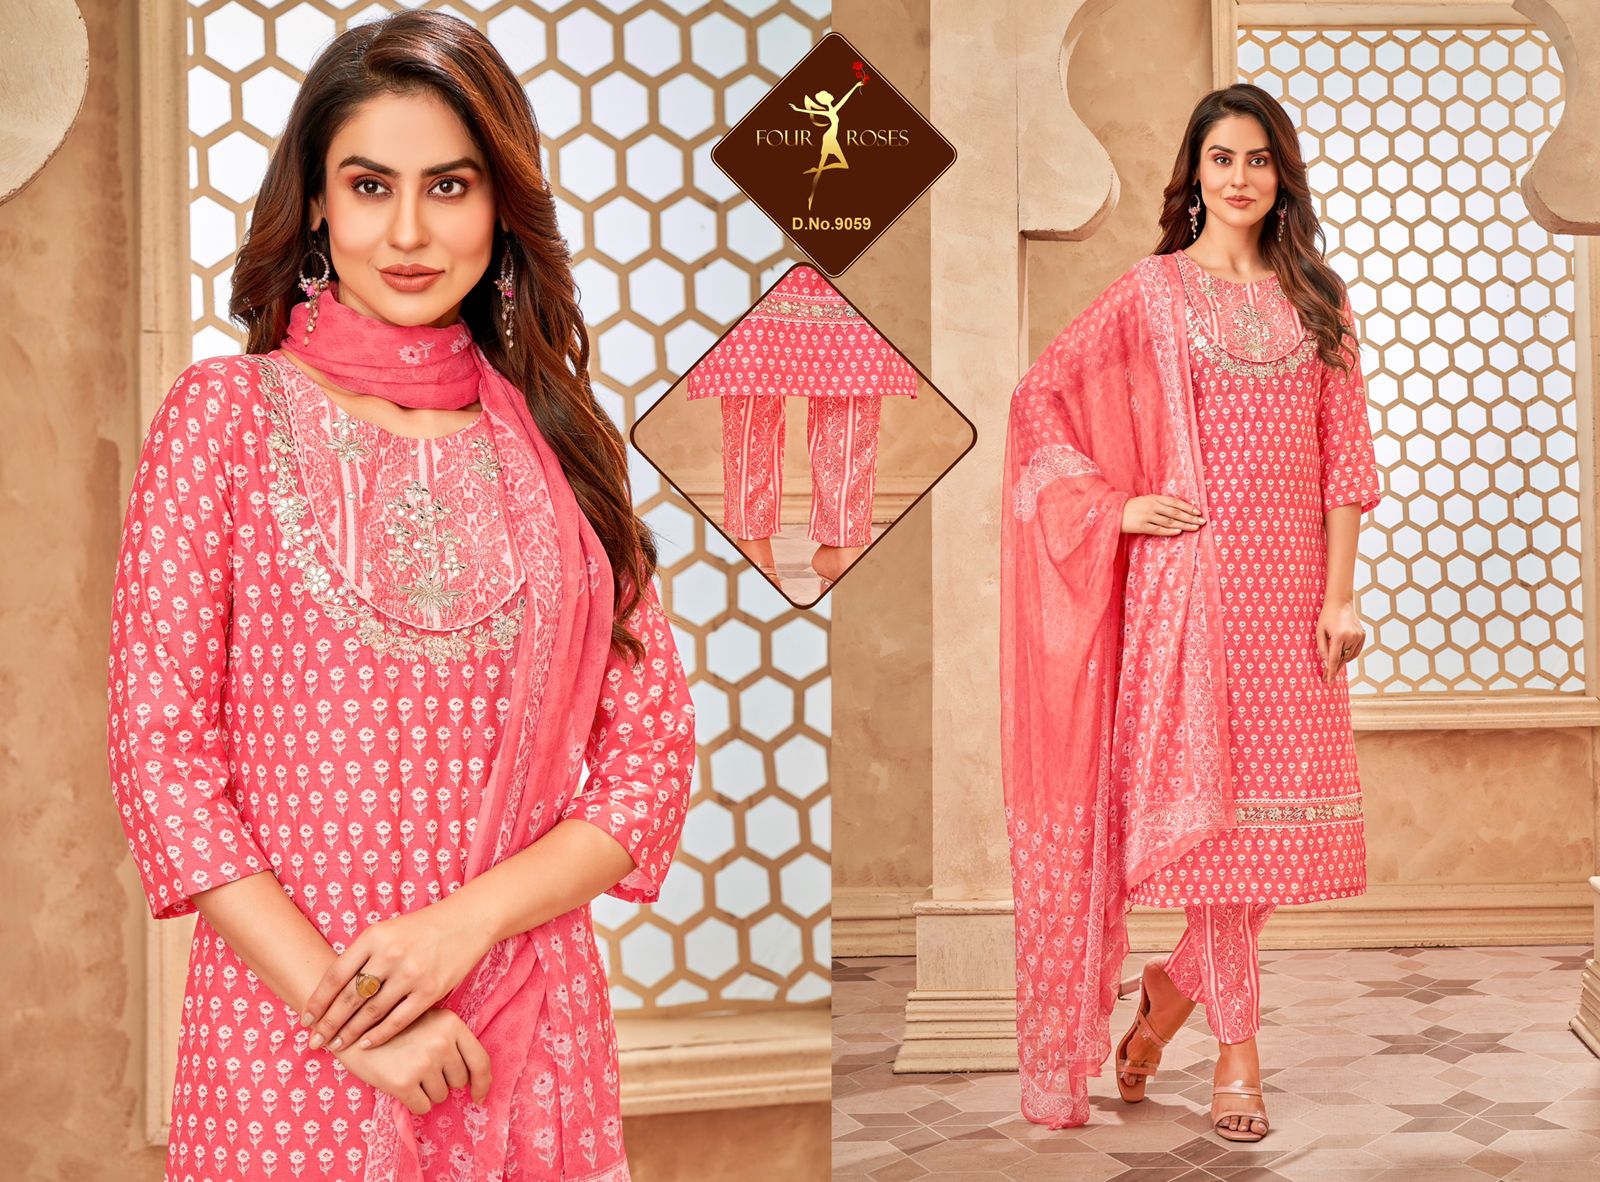 four roses four roses D No 9058 9059 cotton new and modern style top bottom with dupatta catalog